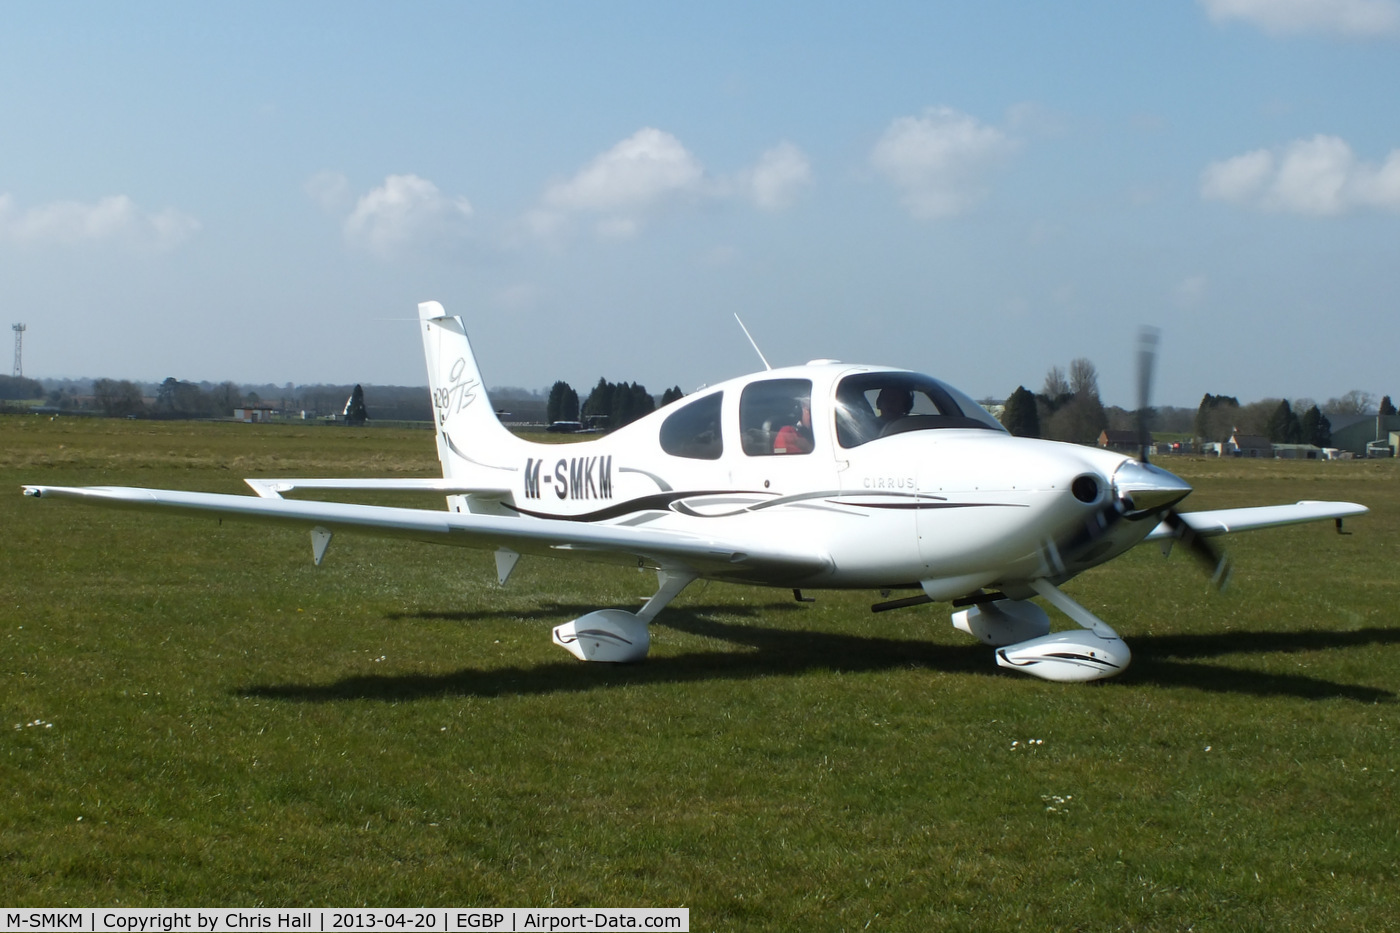 M-SMKM, 2006 Cirrus SR20 GTS C/N 1662, Privately owned